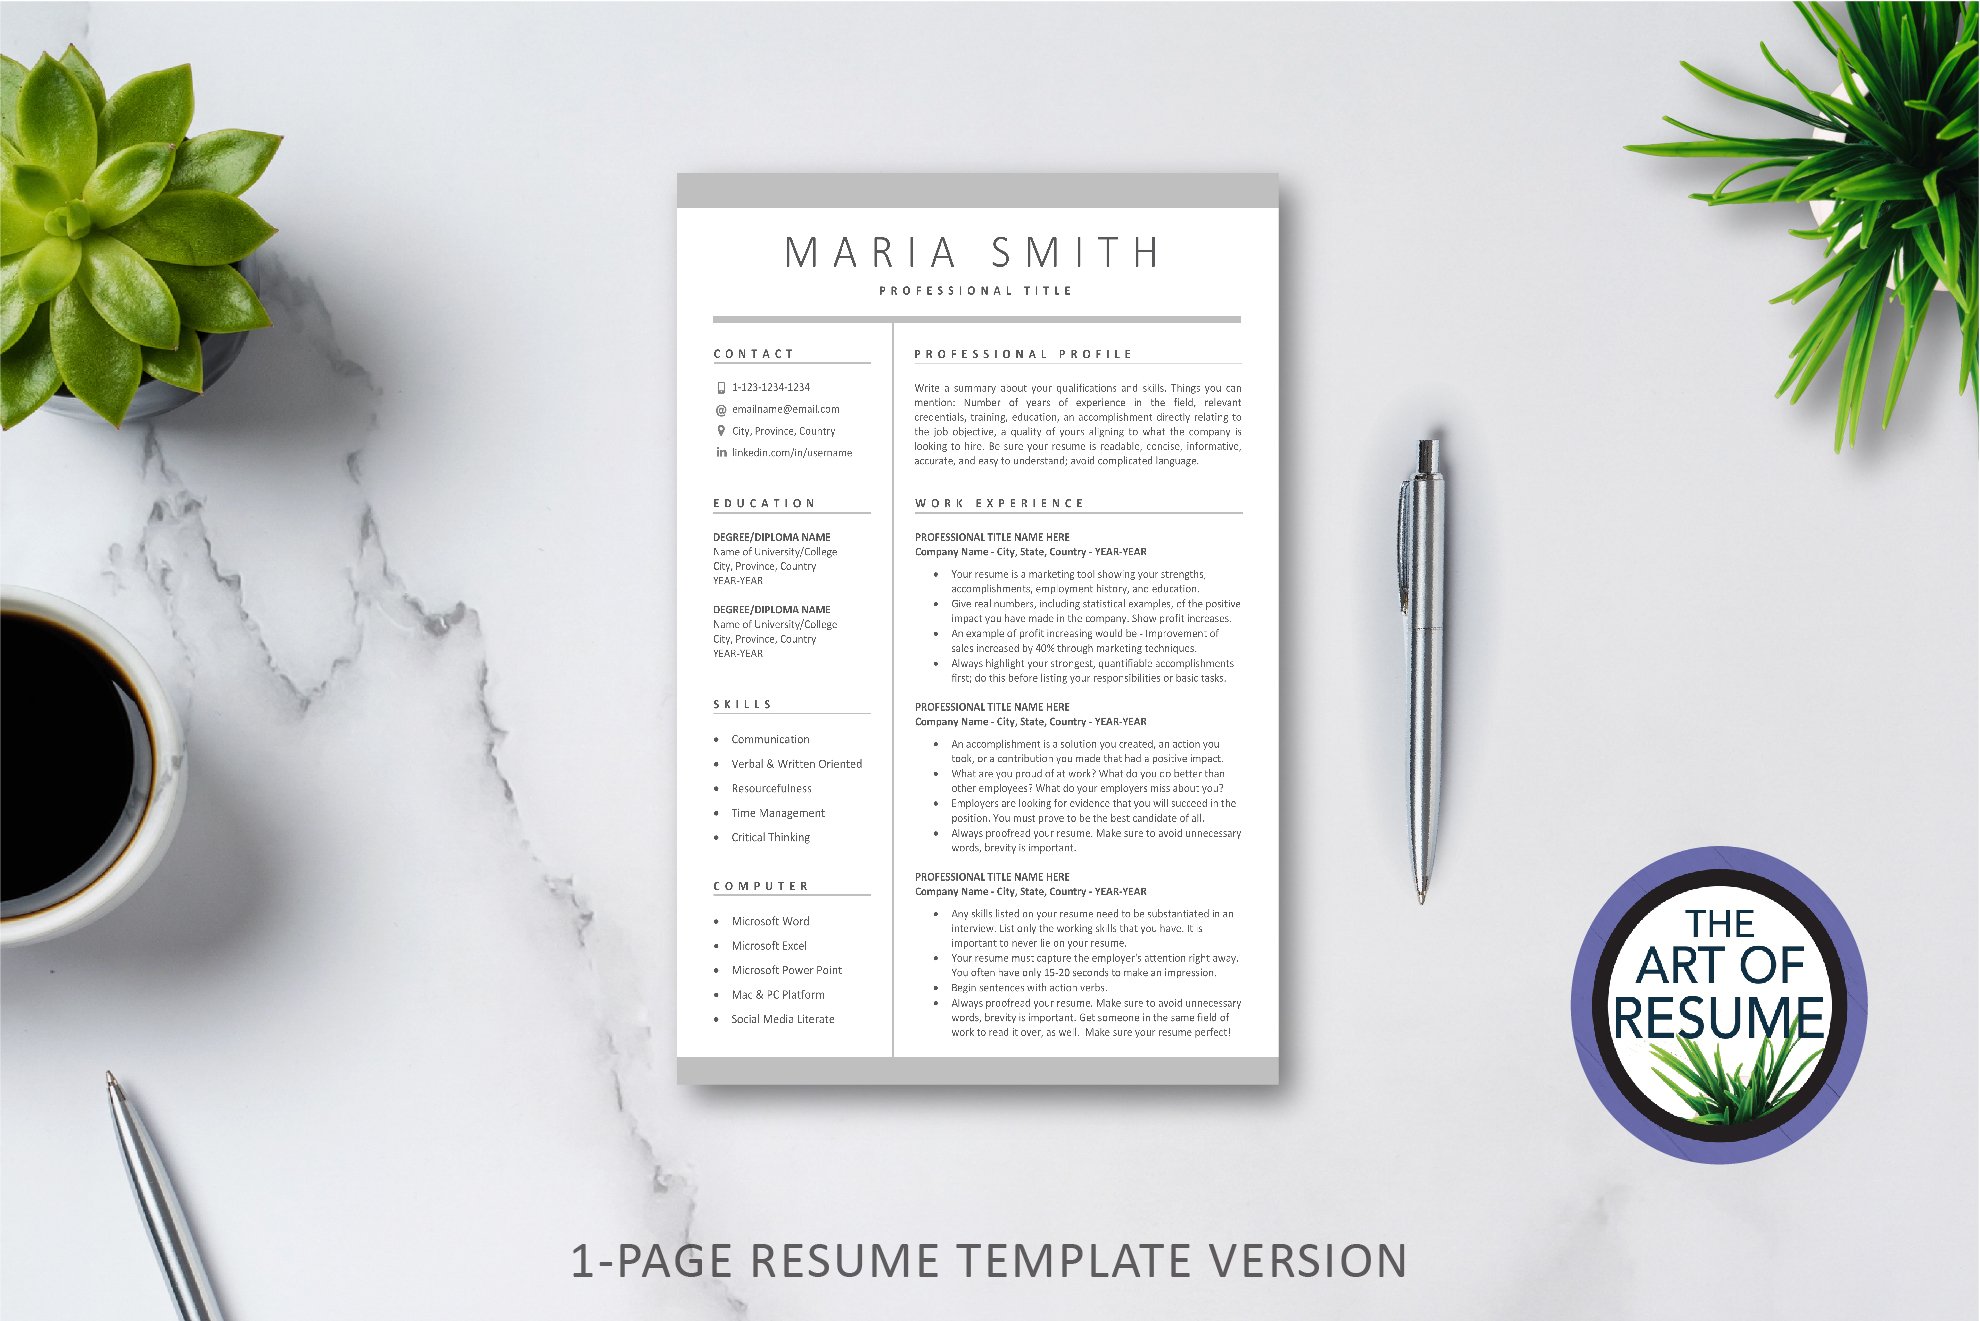 Resume Template & Free Cover Letter preview image.